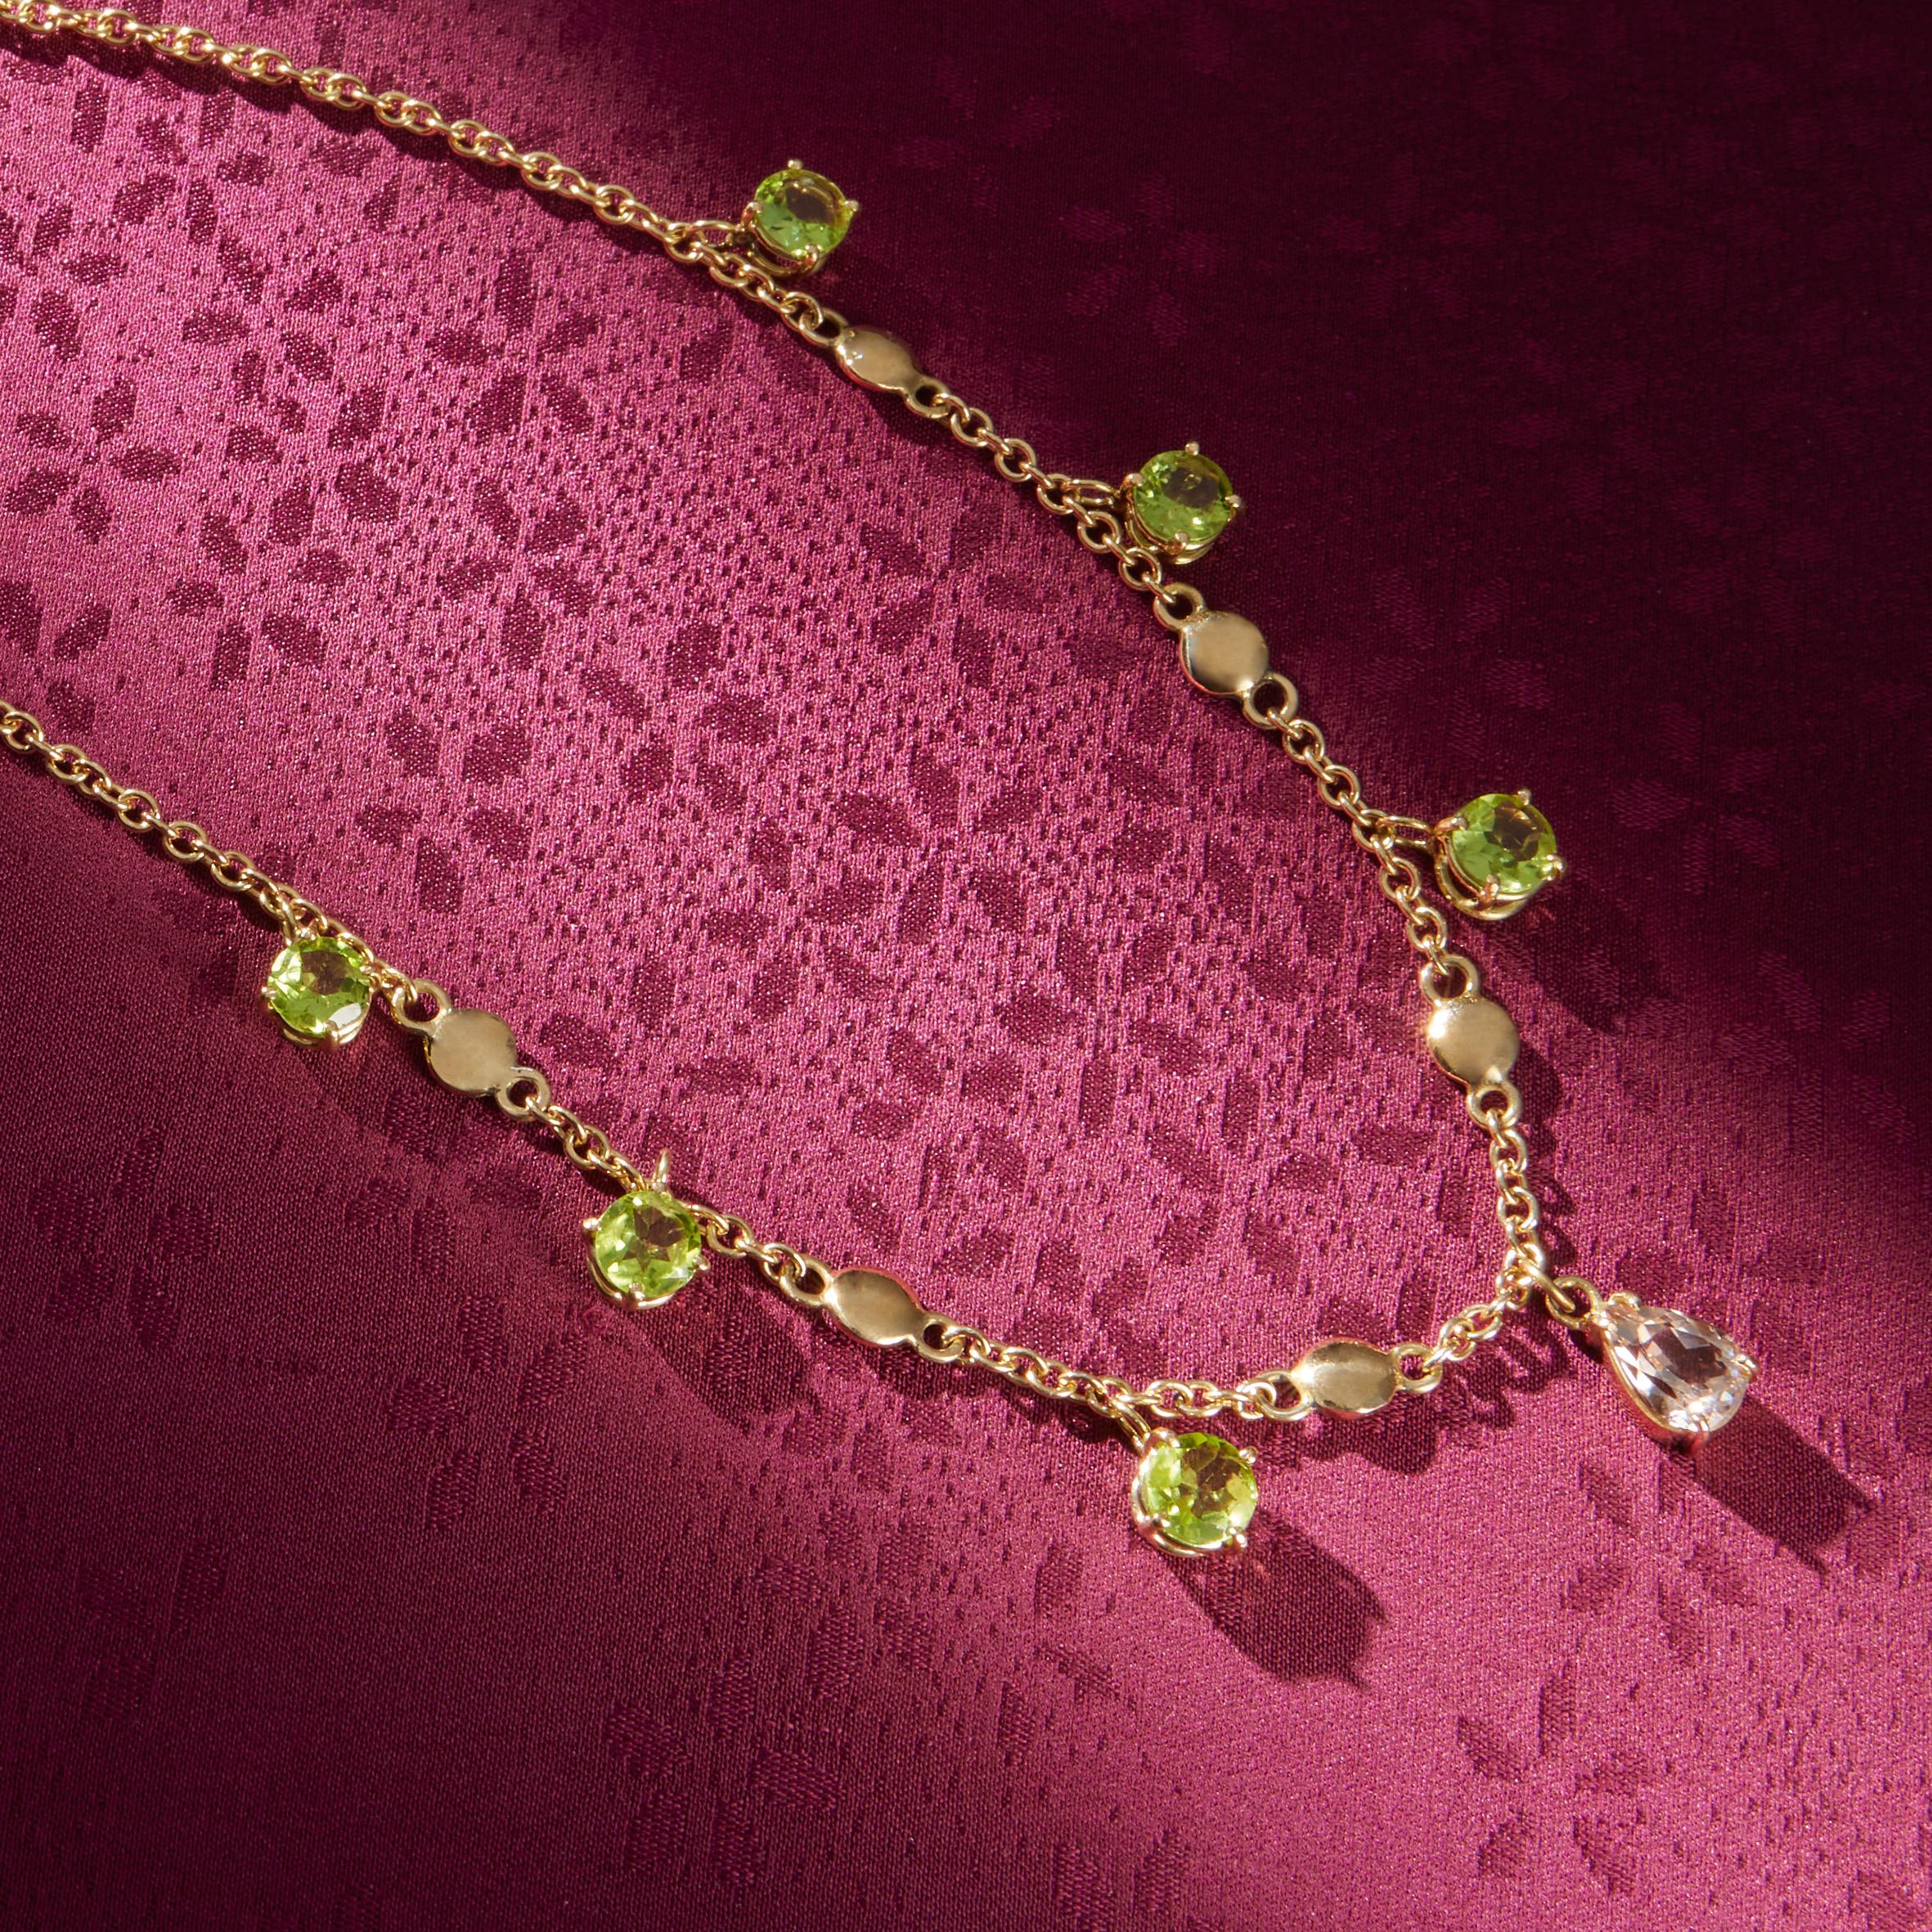 Very nice  nnecklace round neck with peridot sapphire drop in the center champagne color, in between small lentils of gold 18k.
All Giulia Colussi jewelry is new and has never been previously owned or worn. Each item will arrive at your door